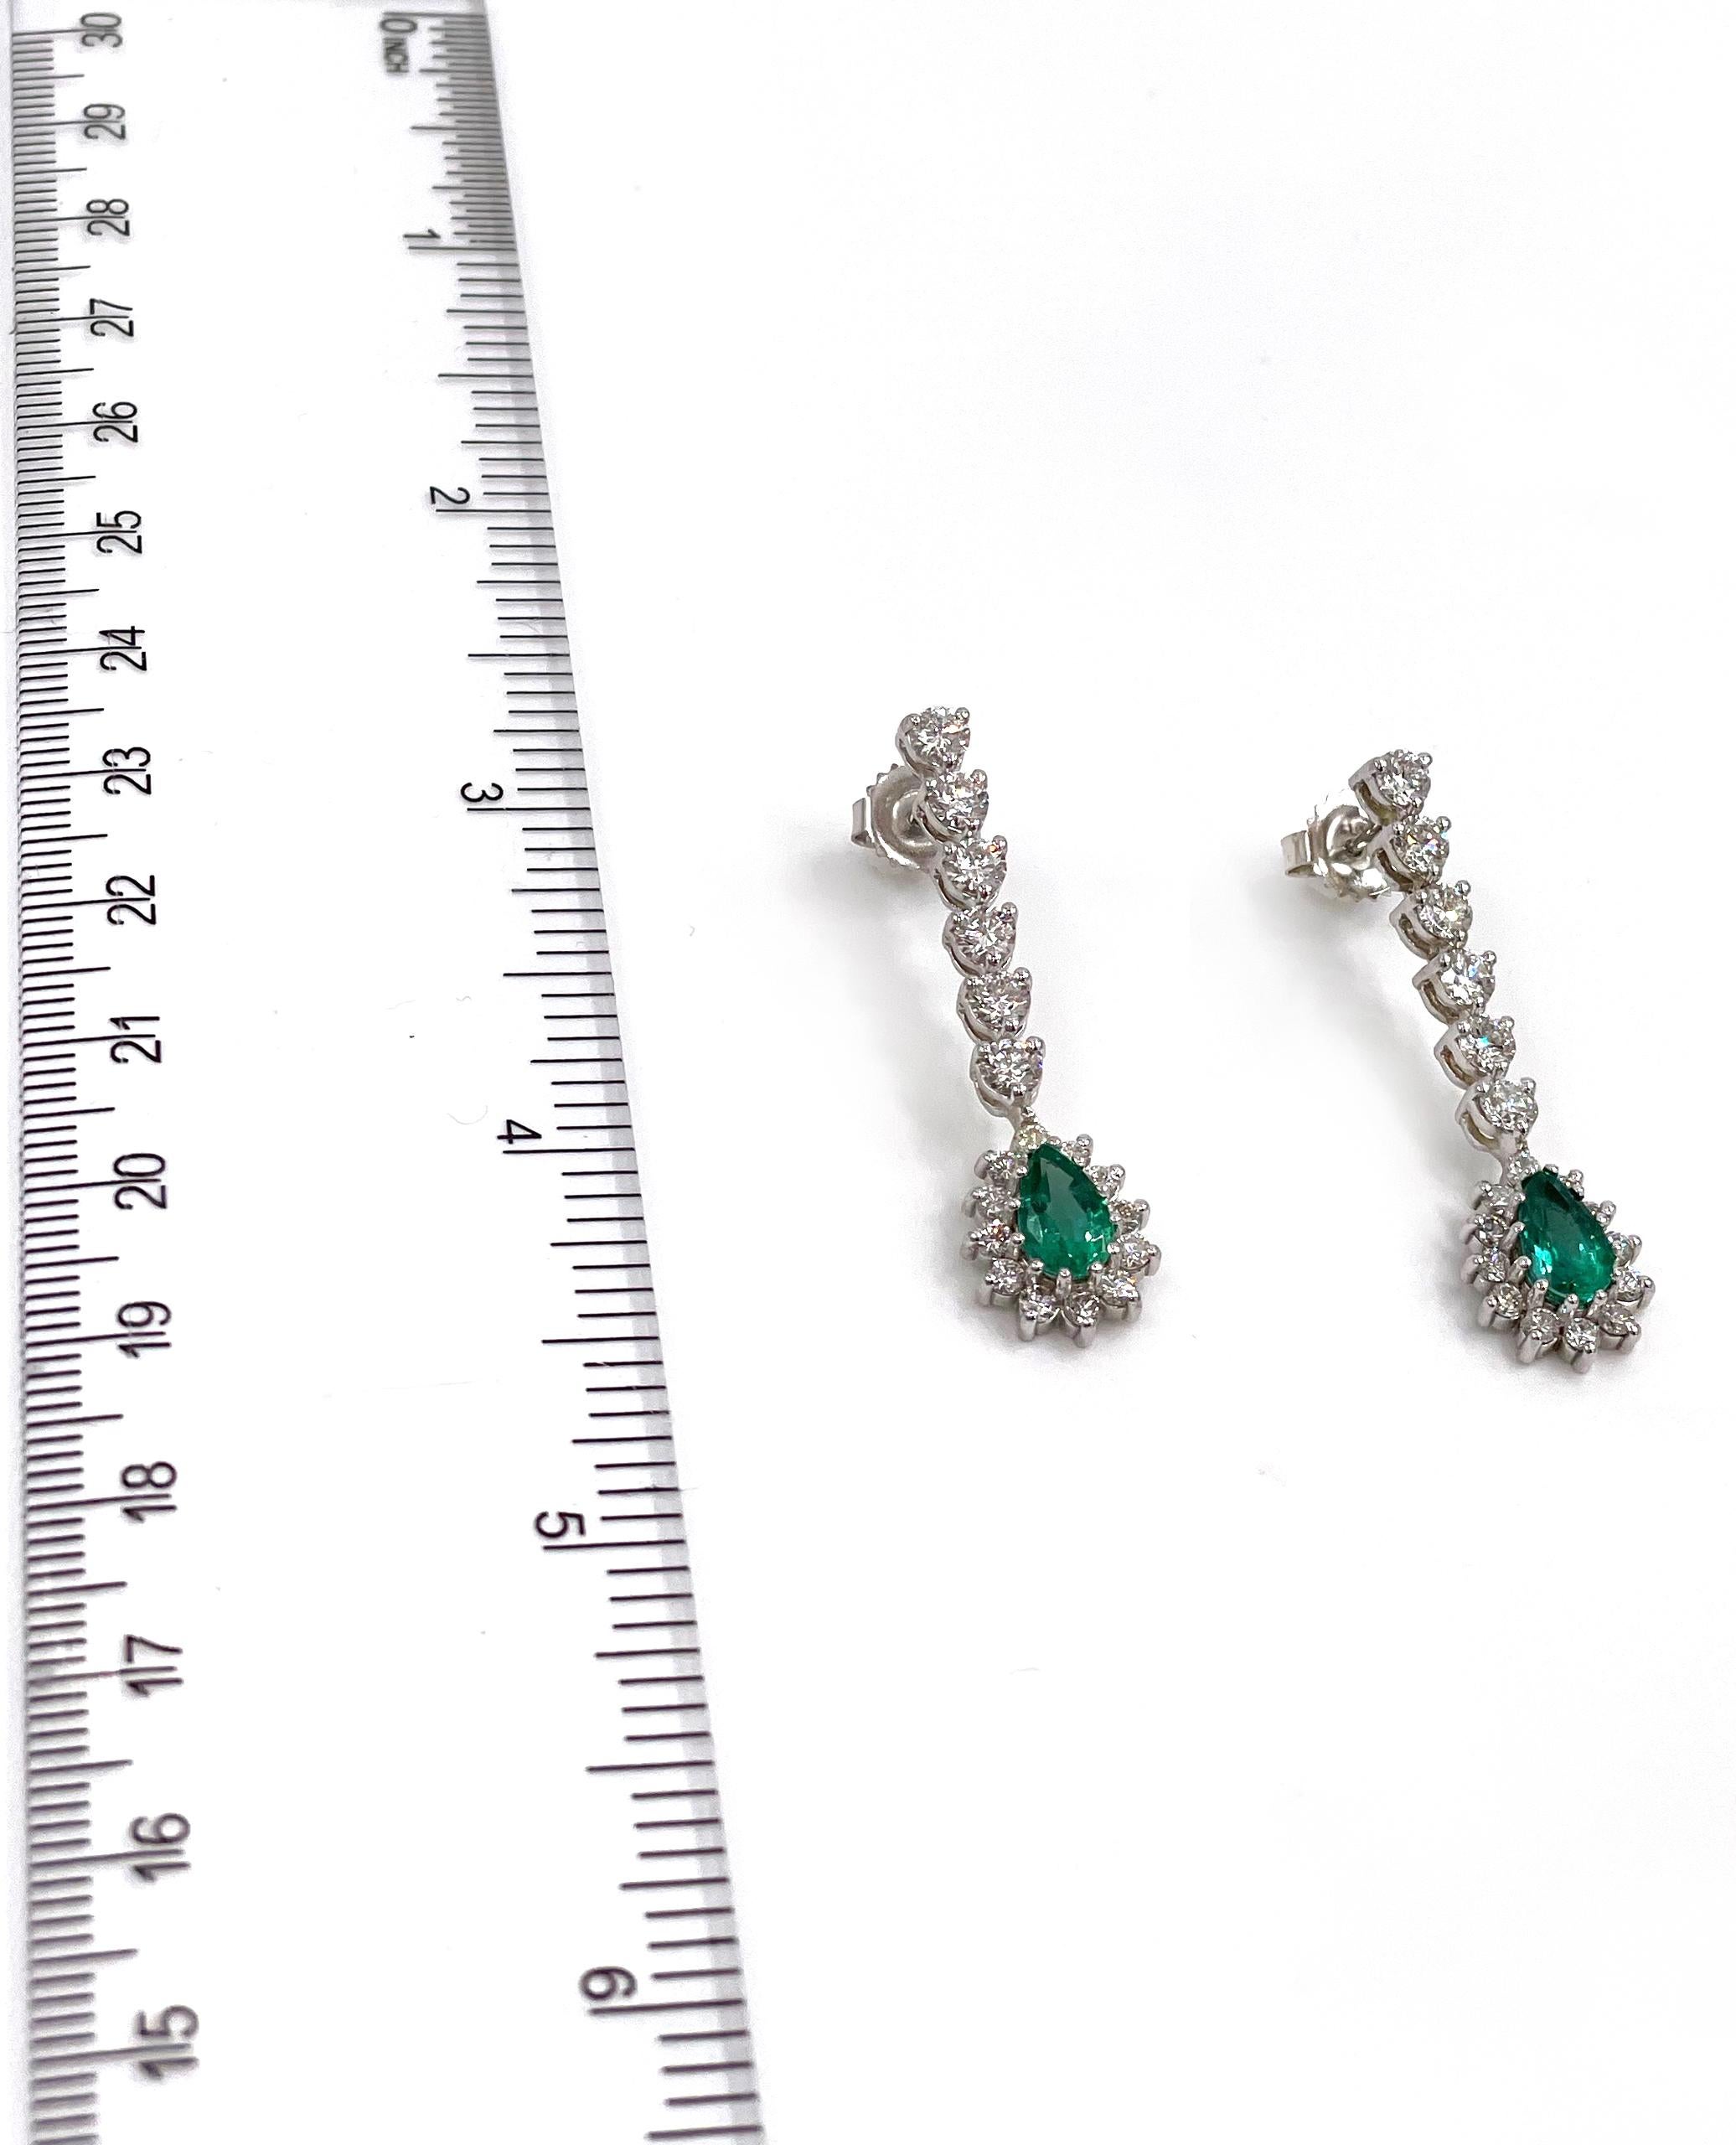 14K white gold long drop earrings with 36 round brilliant-cut diamonds 2.56 carats total weight and two pear shaped emeralds 1.71 carats total weight.

* Diamonds are G/H color, VS2/SI1 clarity.
* Push back closure.